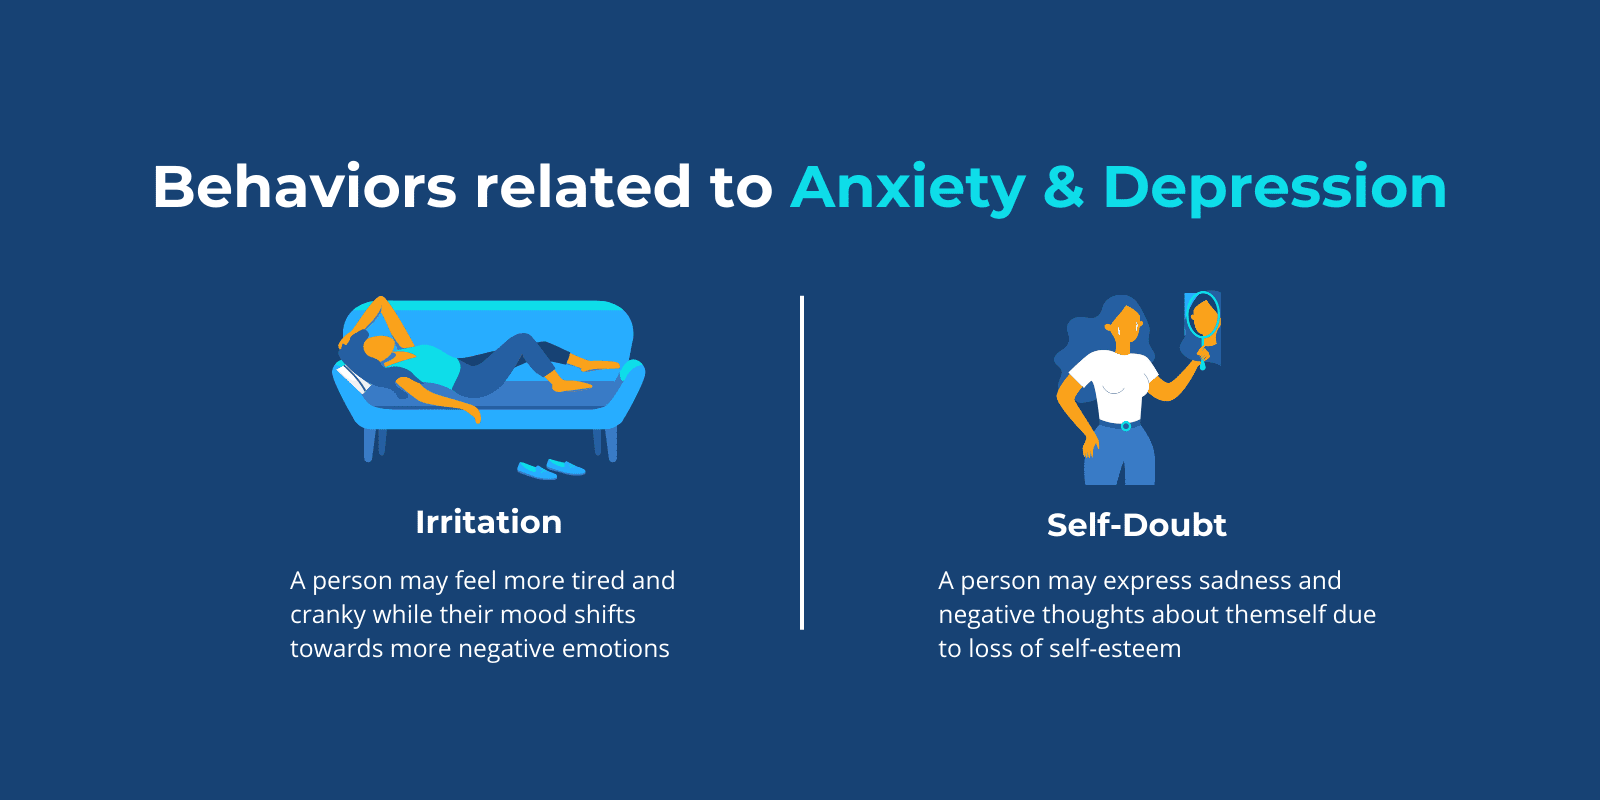 "Behaviors related to Anxiety & Depression" broken down into Irritation and Self-Doubt represented with relevant illustrations and supporting texts